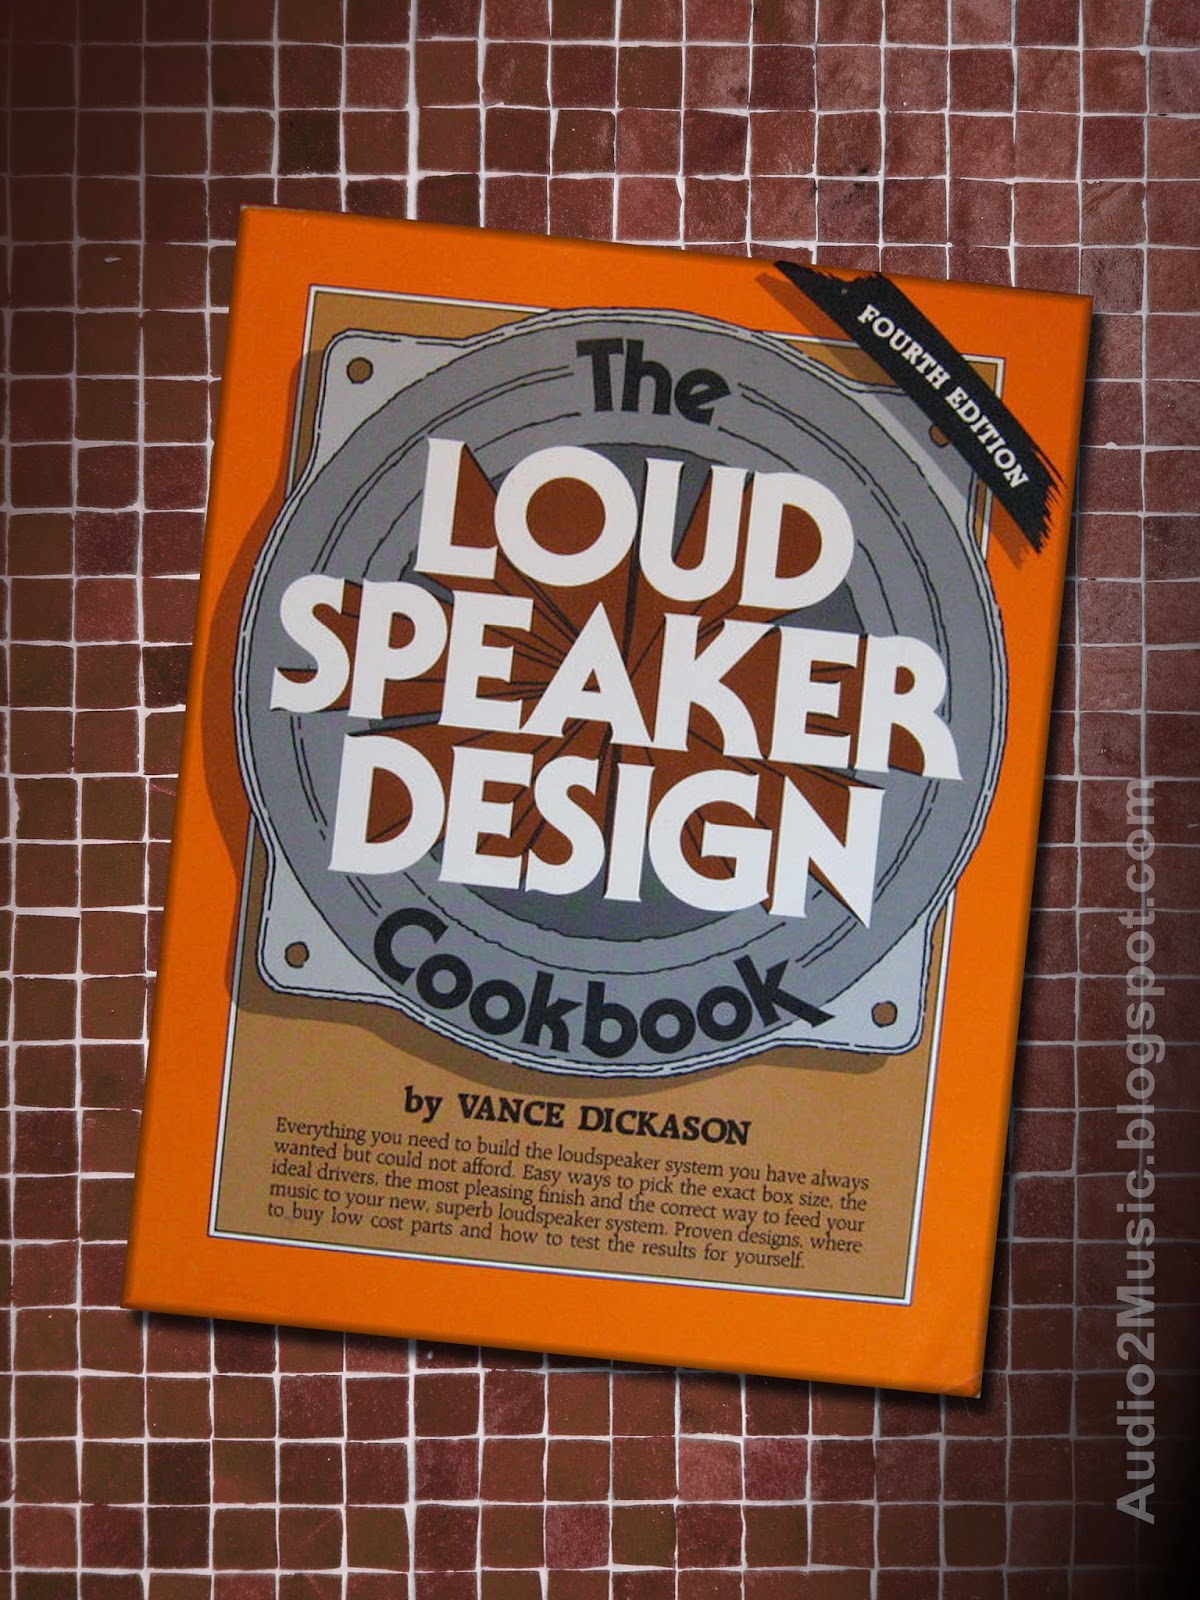 Image of The Loudspeaker Design Cookbook by Vance Dickason over a tile table